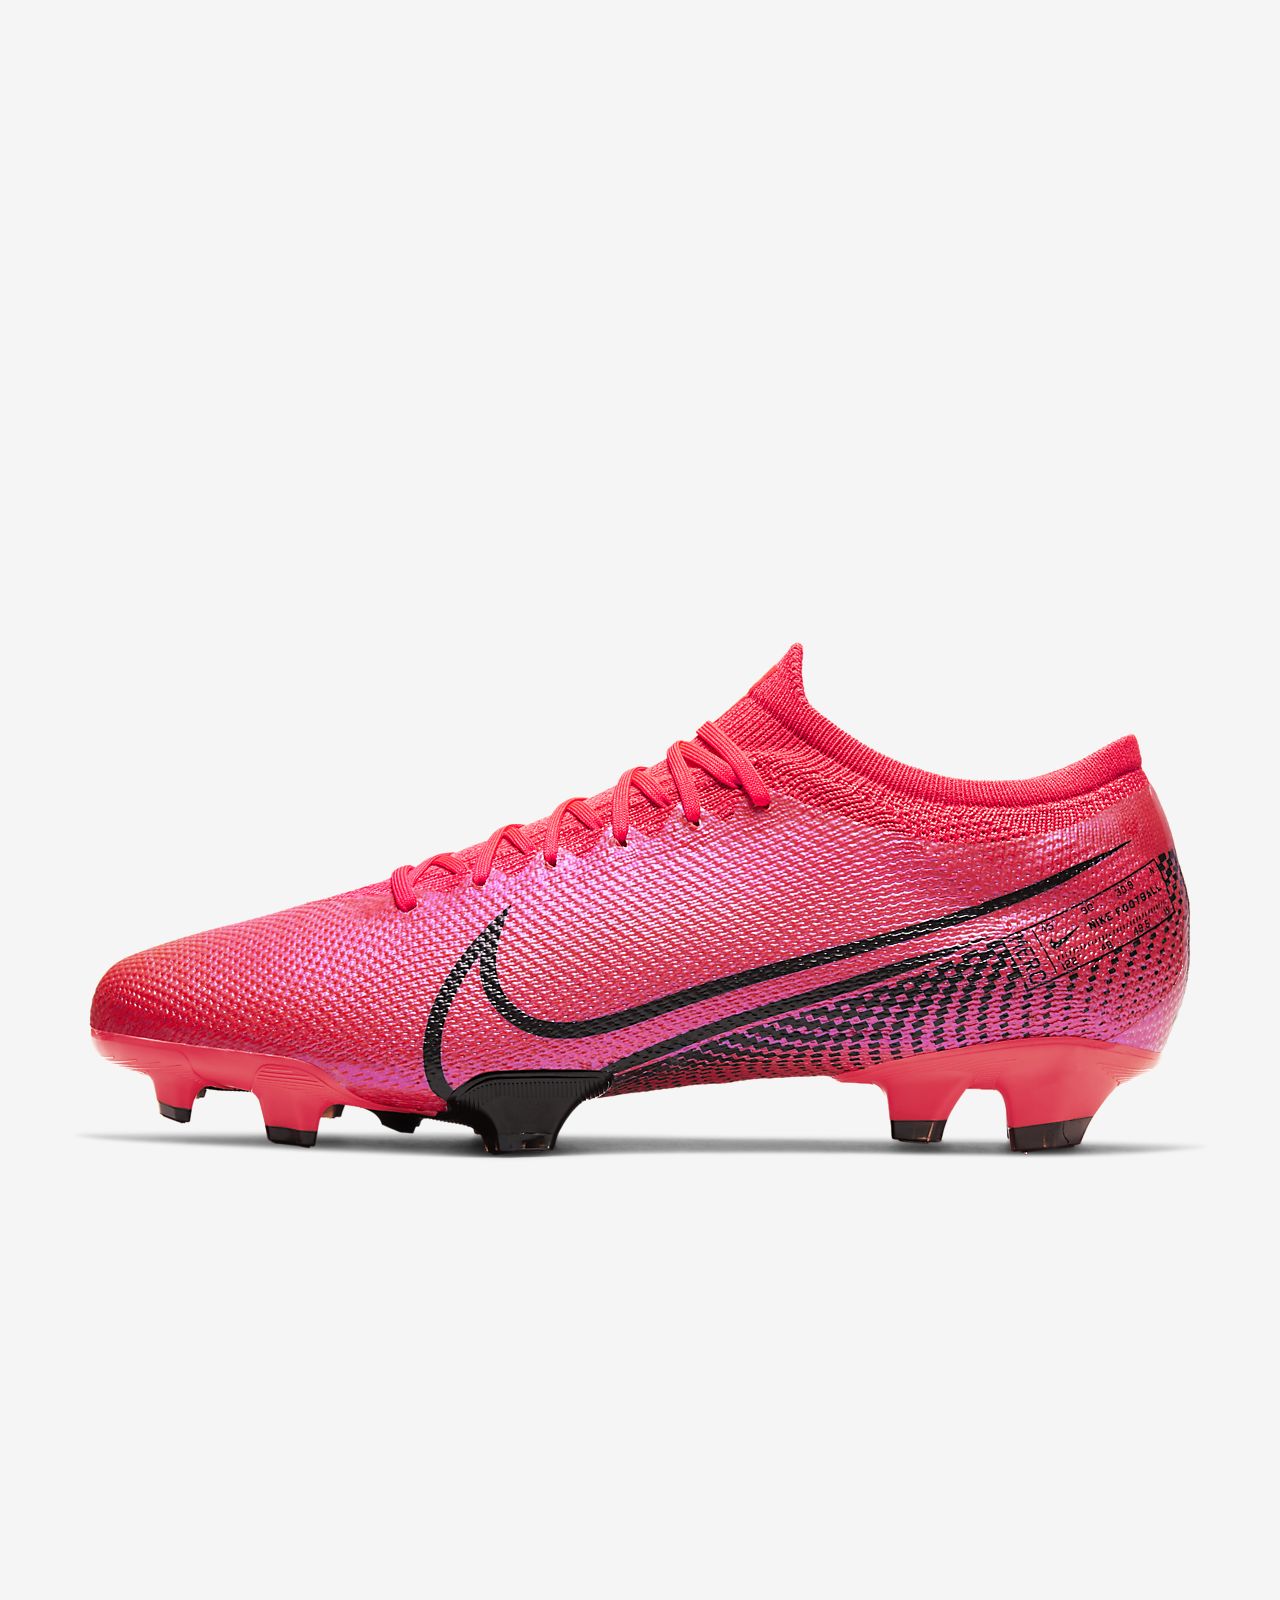 Nike Mercurial Vapor 13 Pro IC from 89.95? Price comparison.